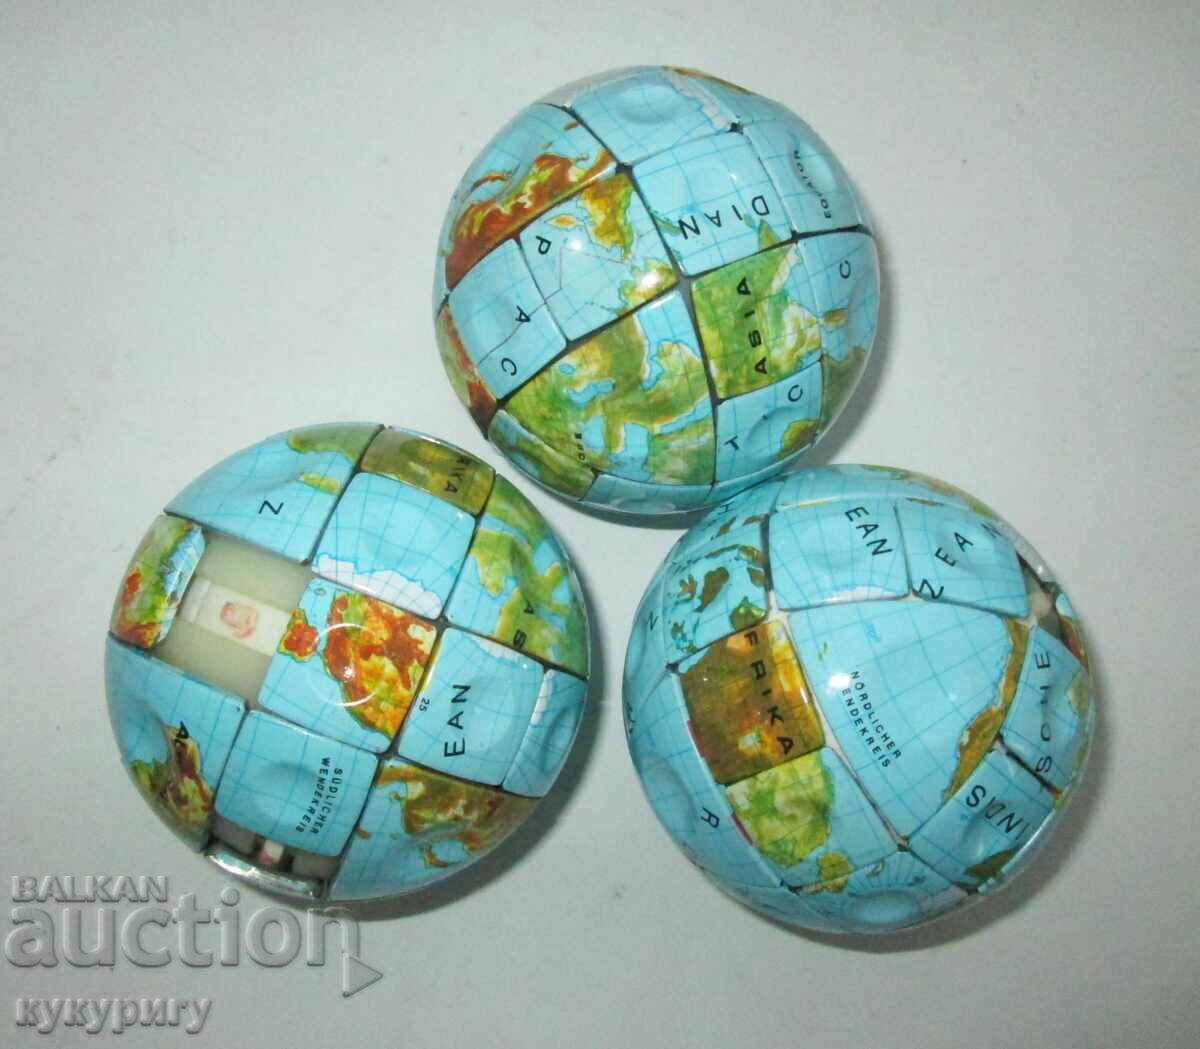 Lot of 3 pieces old mechanical sheet metal globe puzzle